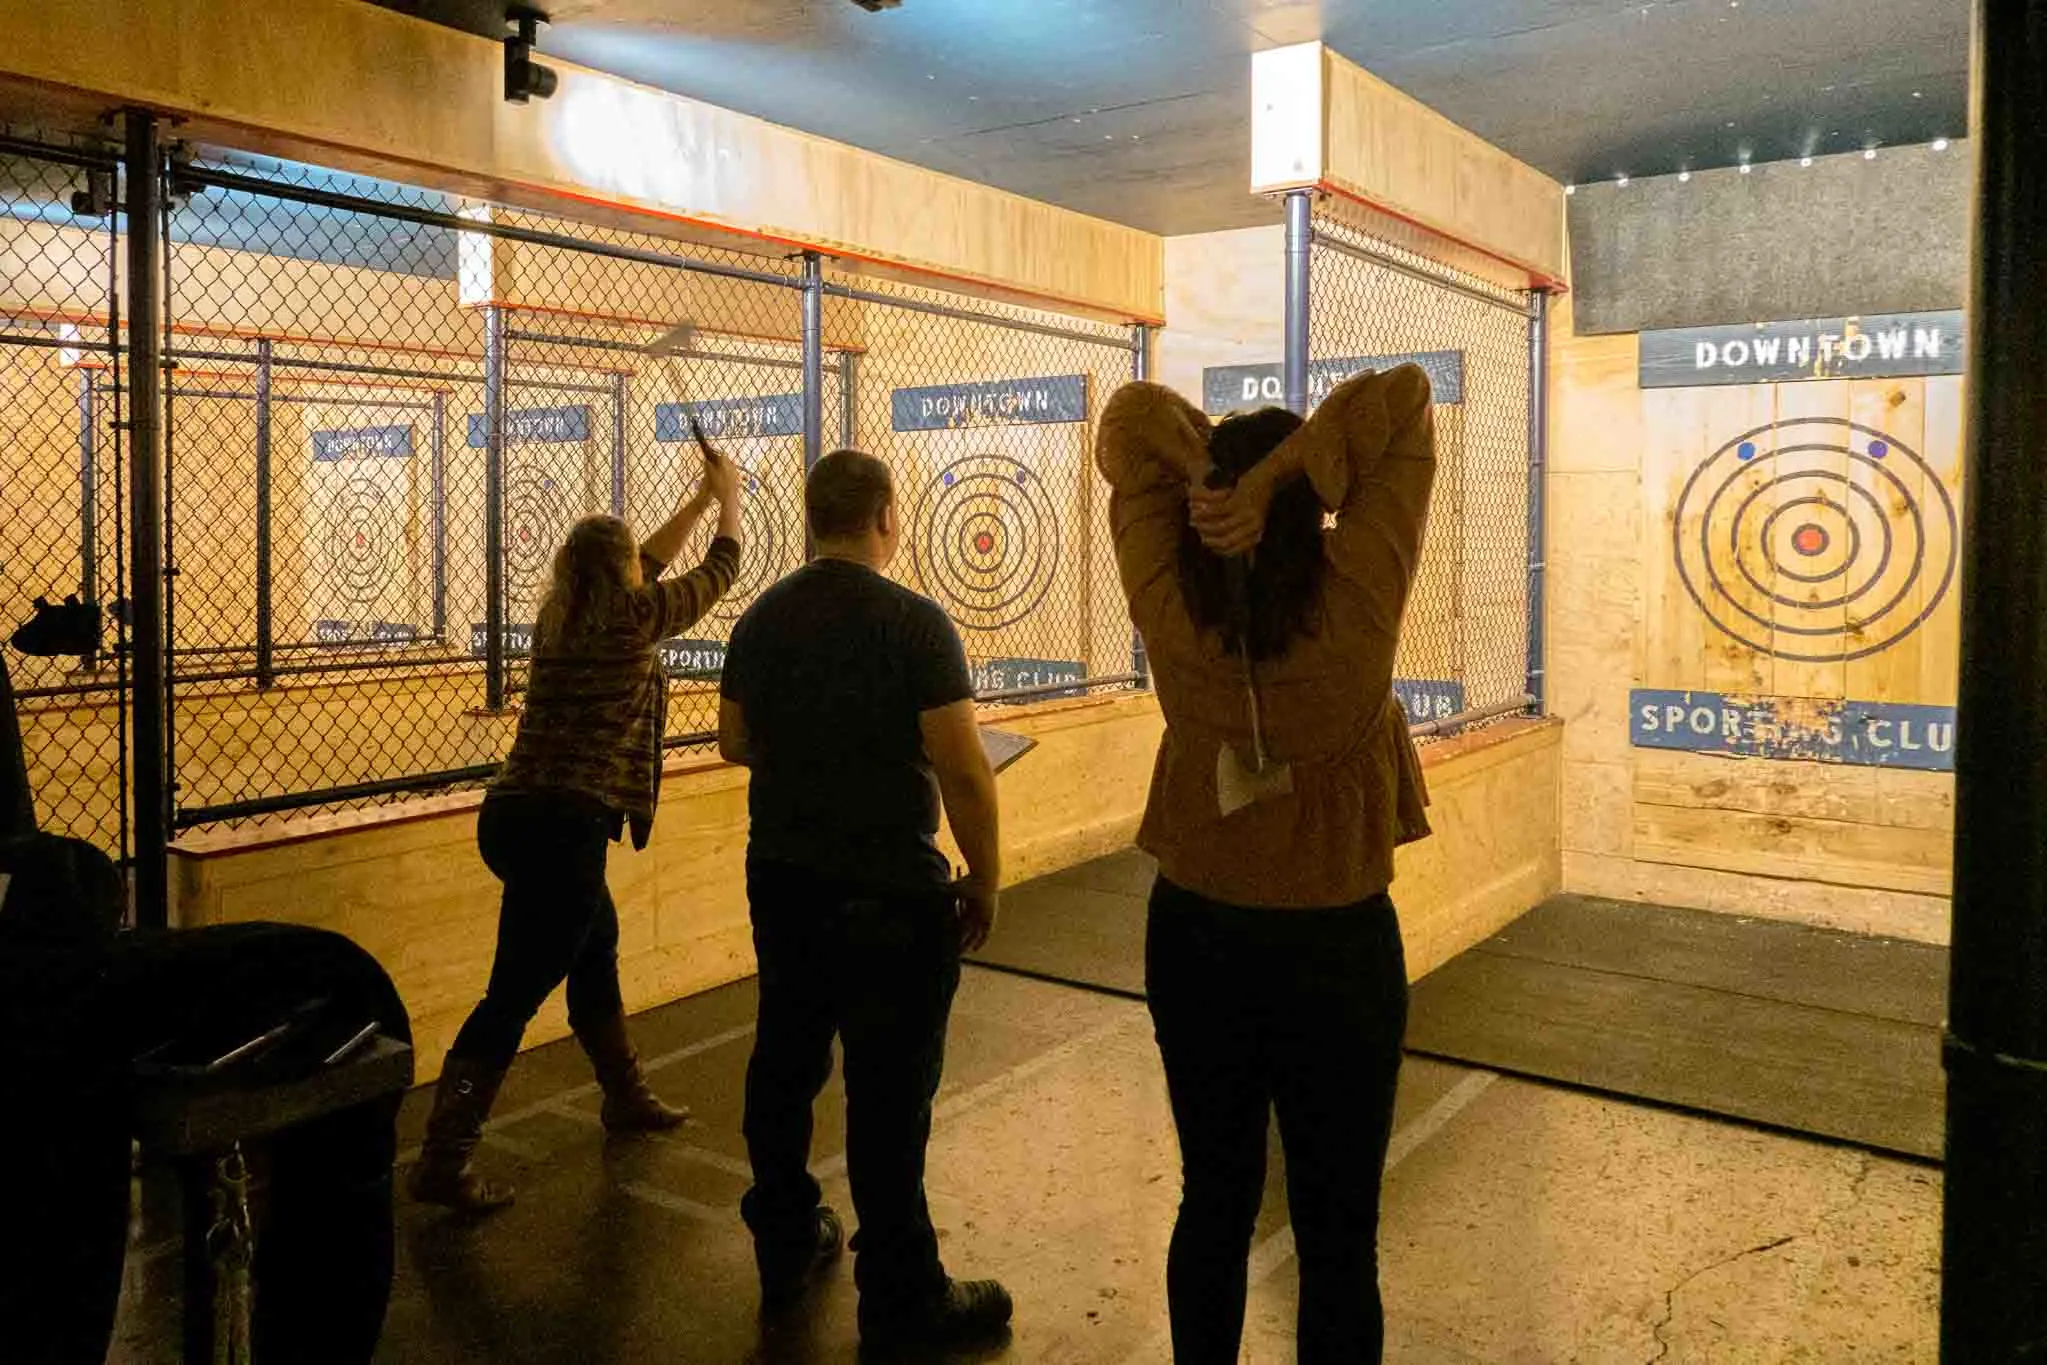 Two people throwing axes at targets on a wall at Downtown Sporting Club in Nashville